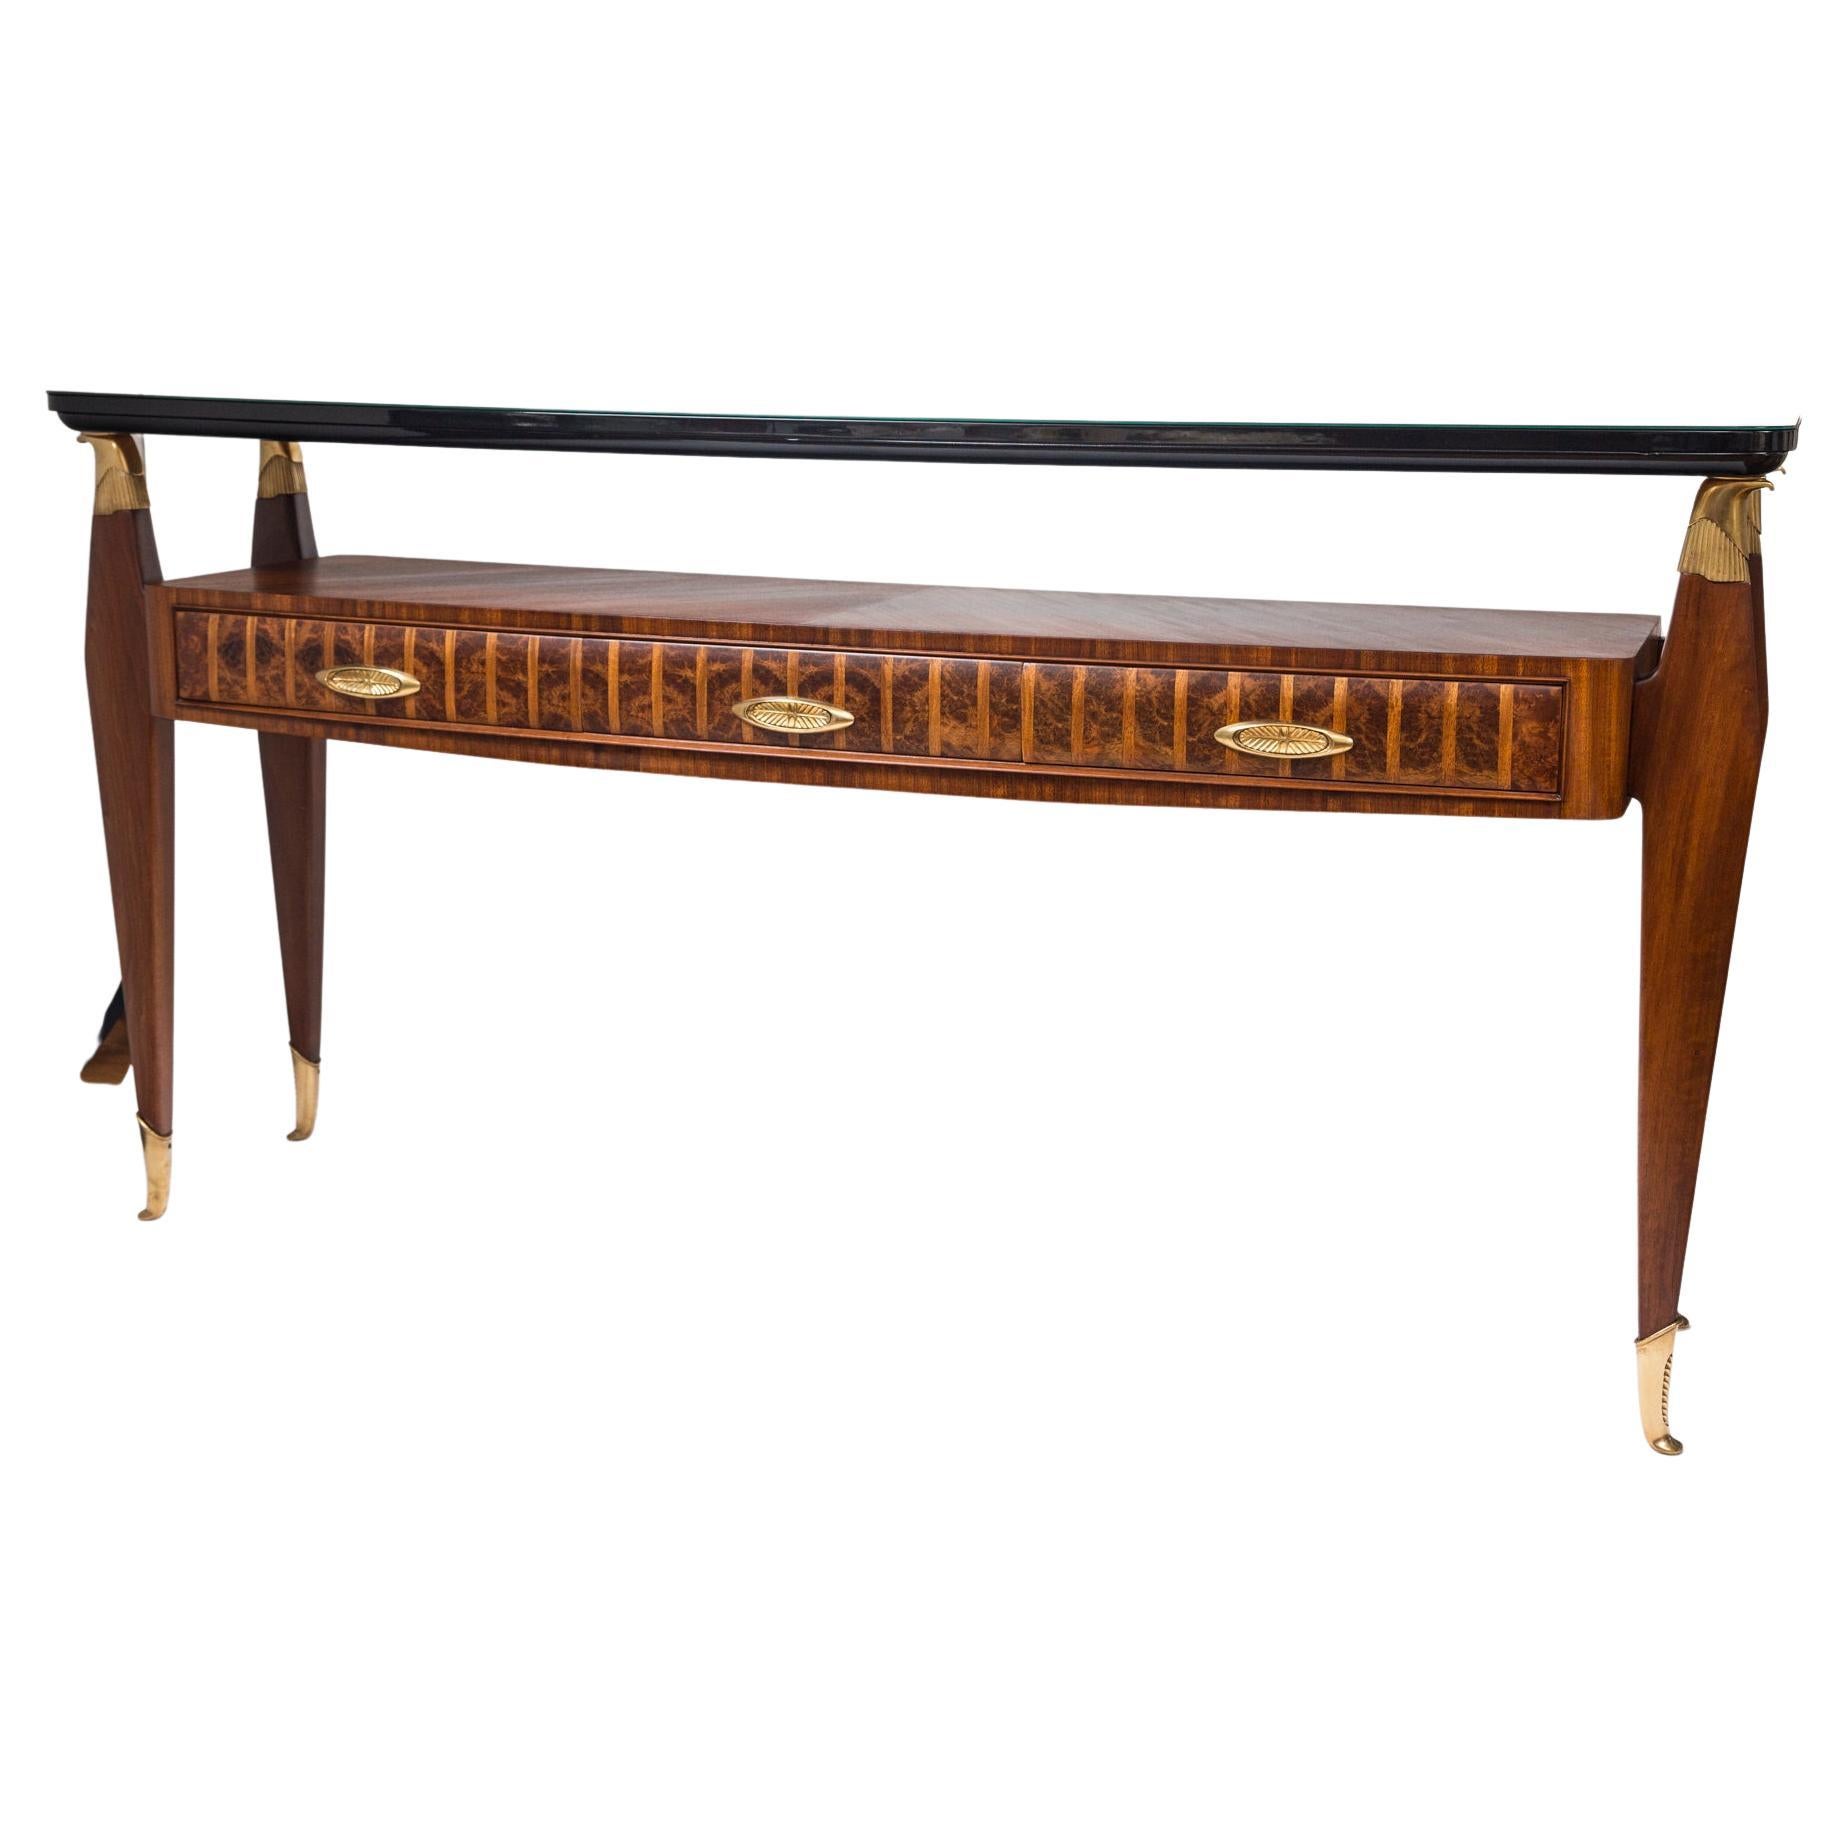 A superb two-tiered console/sideboard with beveled black floating glass plateau supported by bronze eagle heads above an elegant rosewood base comprised of three drawers adorned with oval shaped bronze pulls.

Note finish is not high gloss,  instead